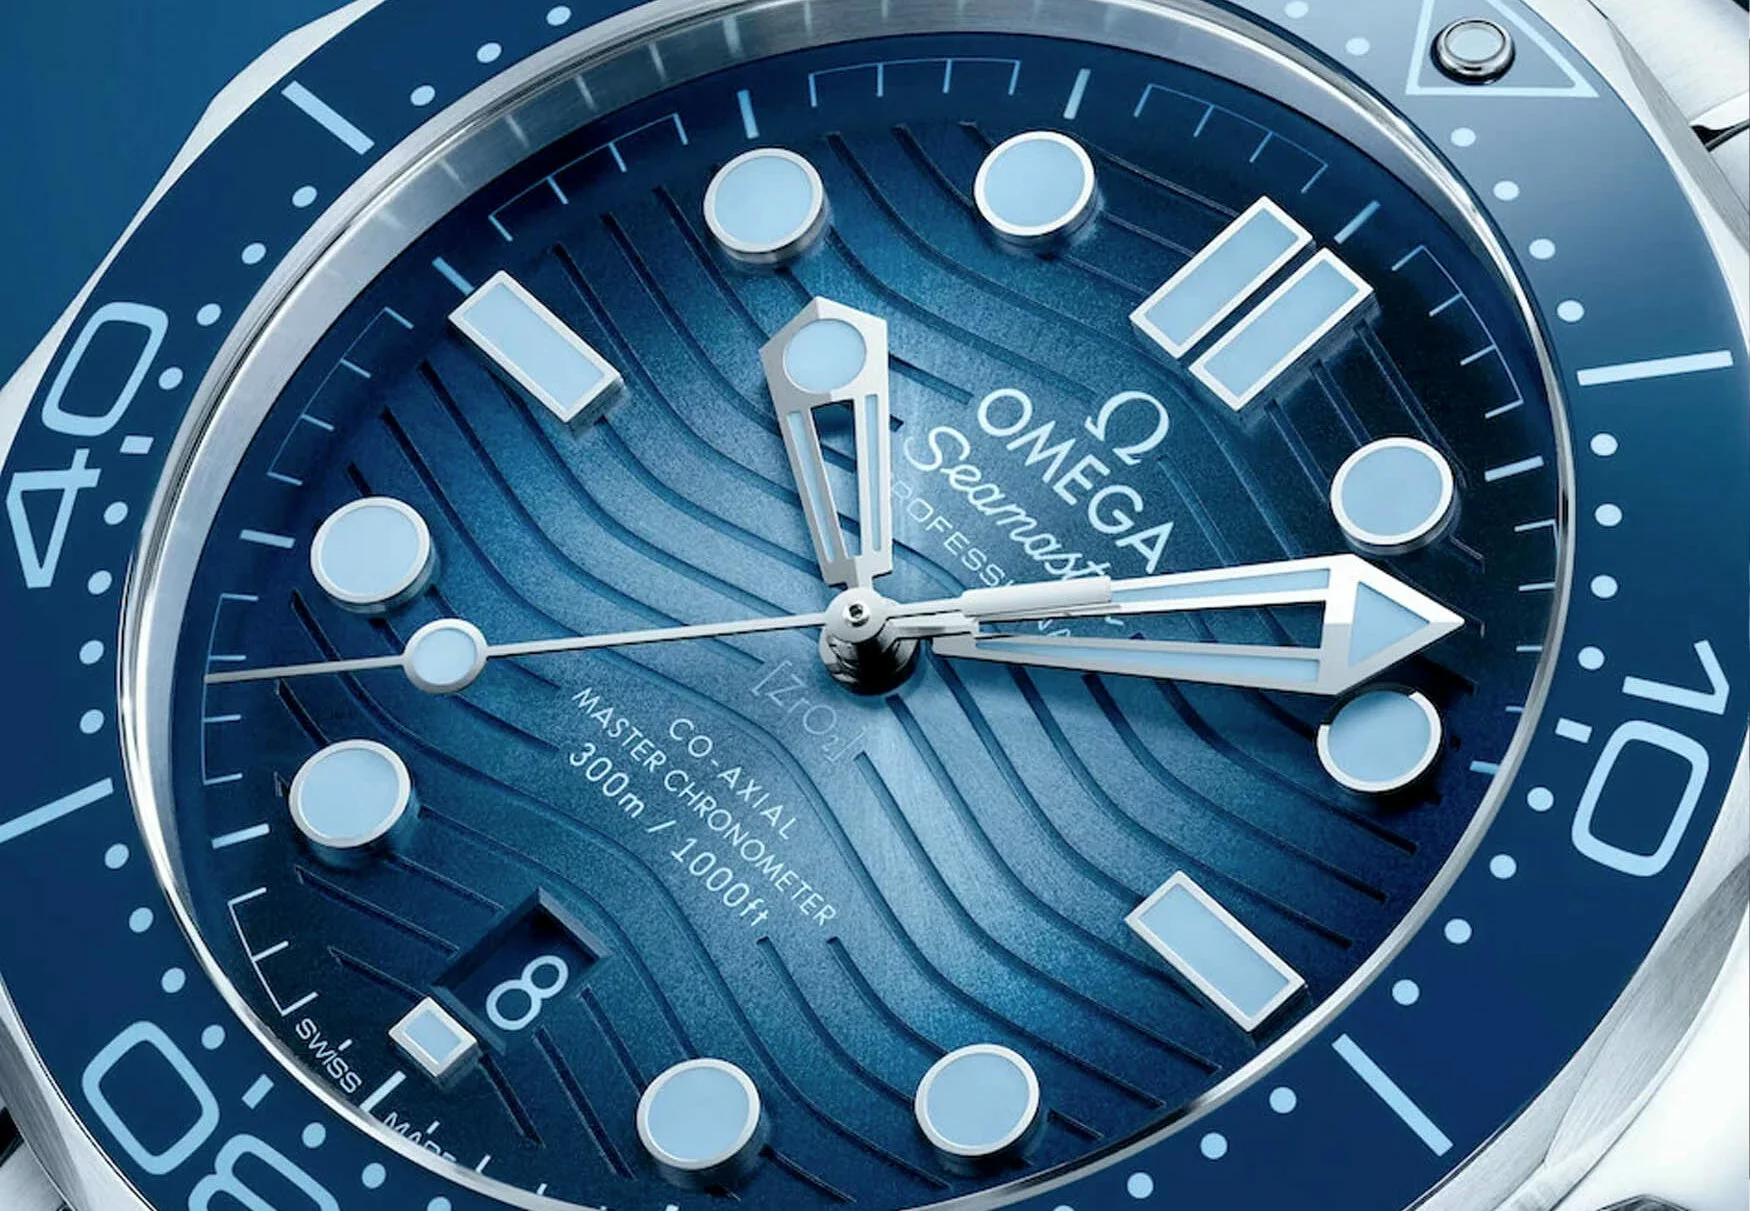 Introducing best 1:1 Omega replica watches uk with wave dials